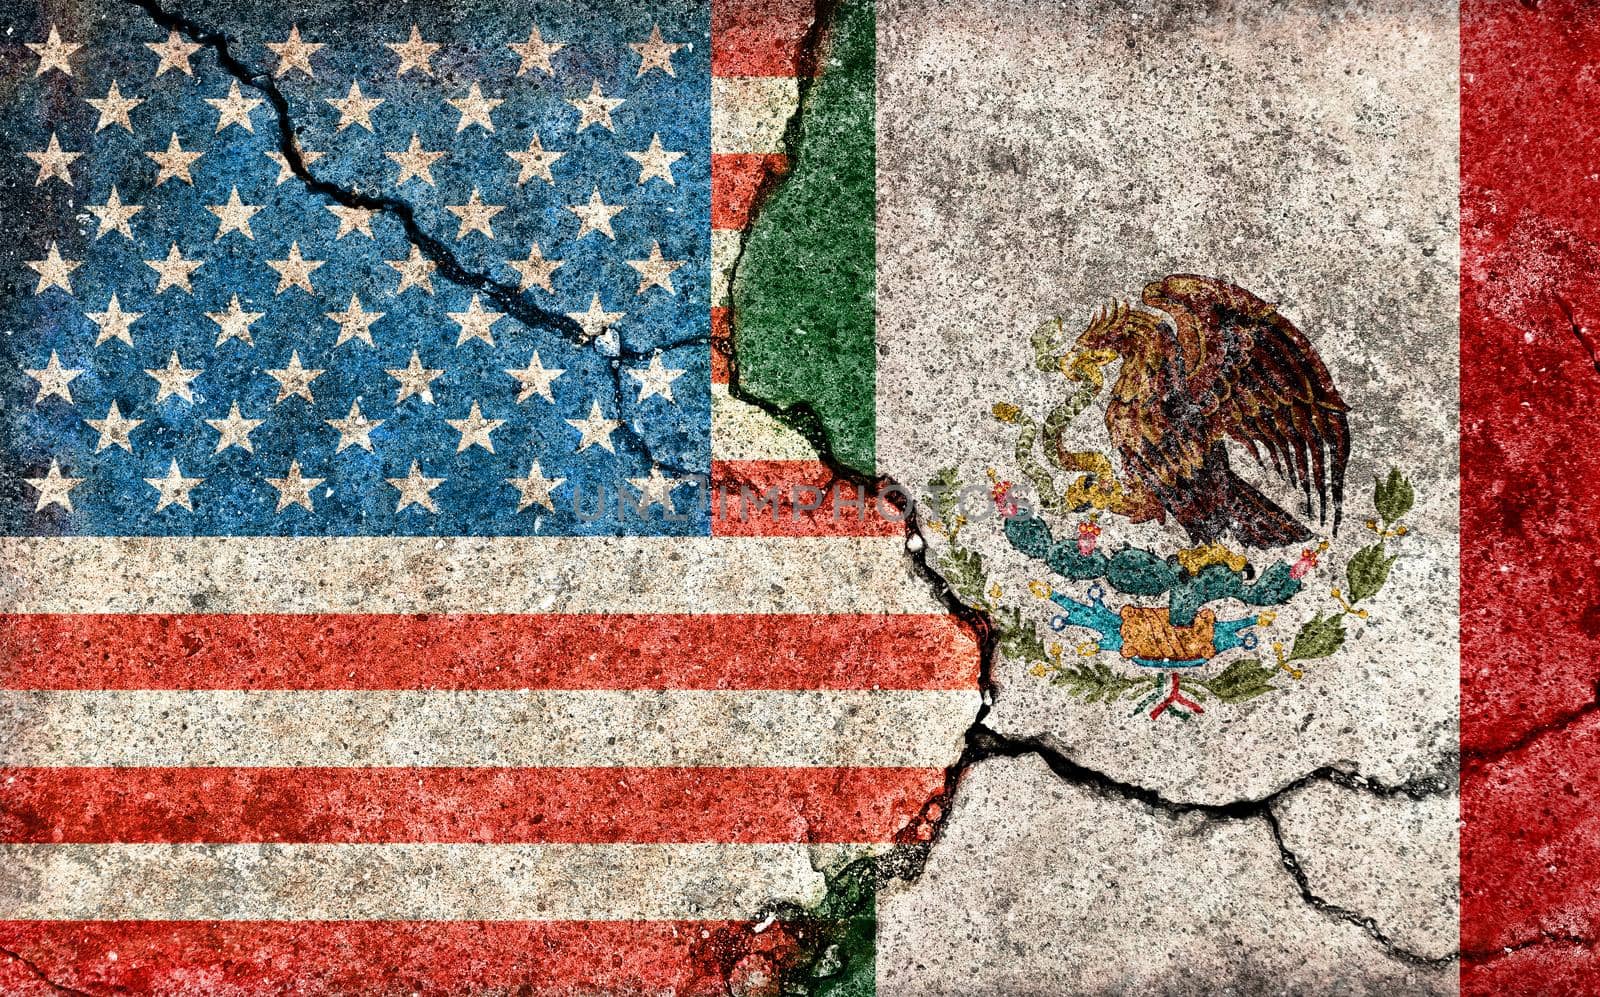 Grunge country flag illustration (cracked concrete background) / USA vs Mexico (Political or economic conflict) by barks